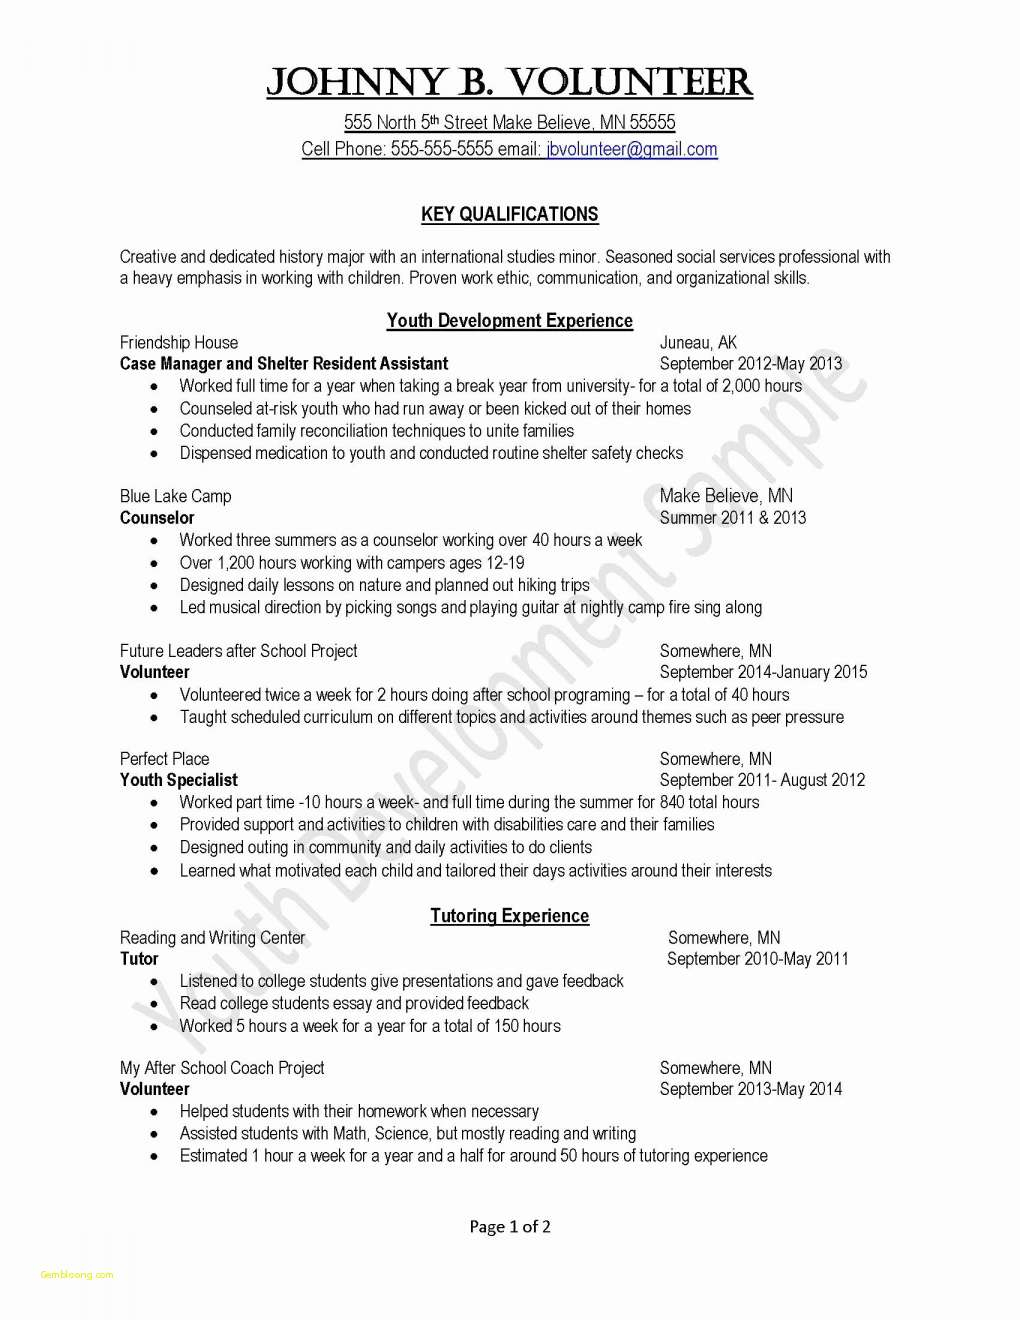 Social Worker Cover Letter Template - Free Resume Templates for Students Takenosumi